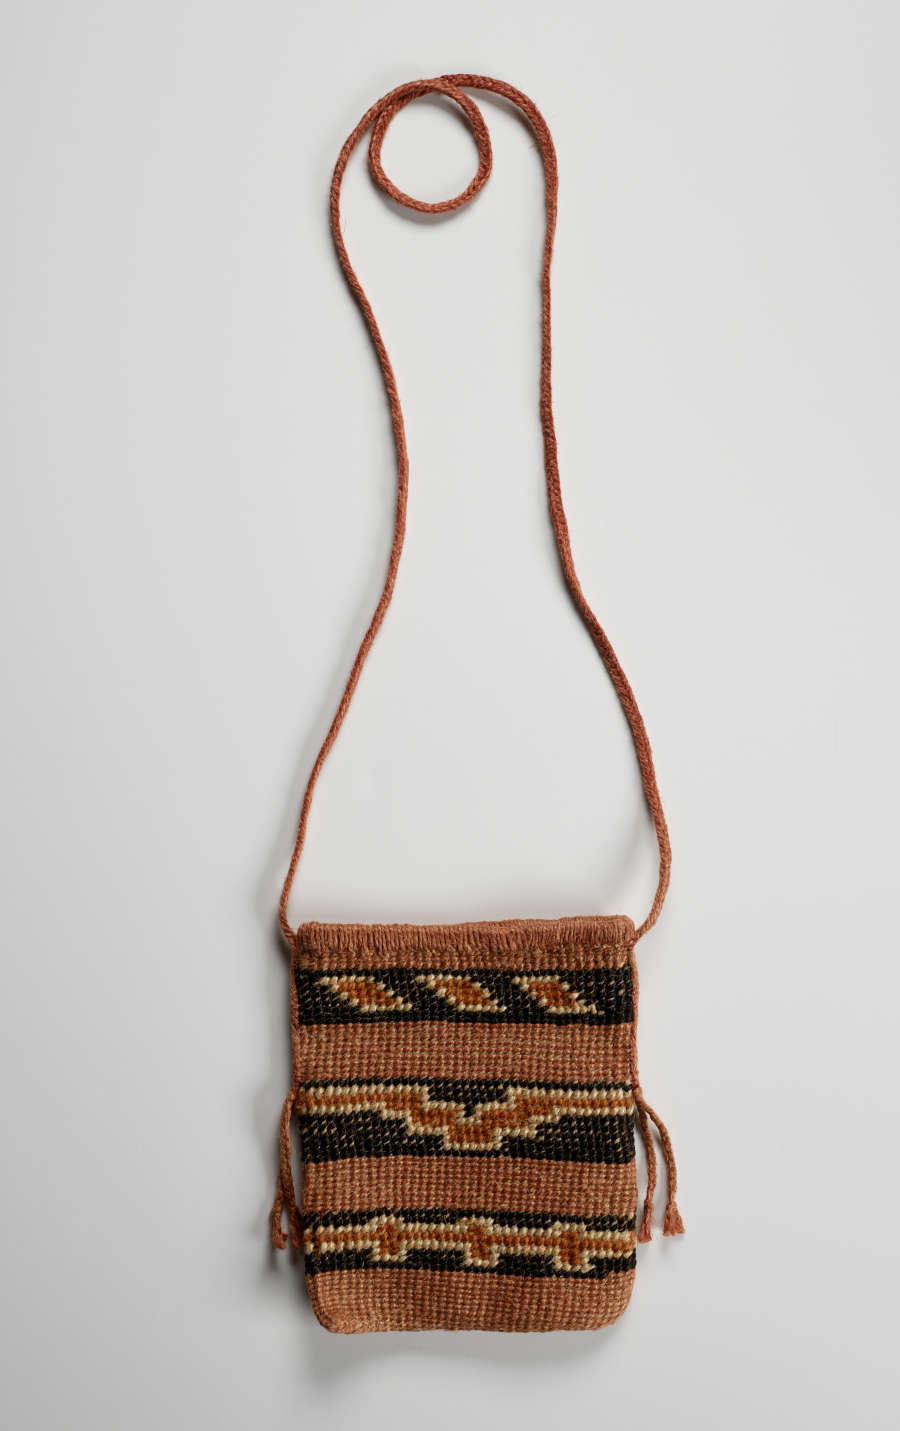 Woven rectangular bag with a long strap laying flat on the white backdrop. Its body features three rows of terracotta separated by three rows of yellow bordered terracotta geometric patterns against black.